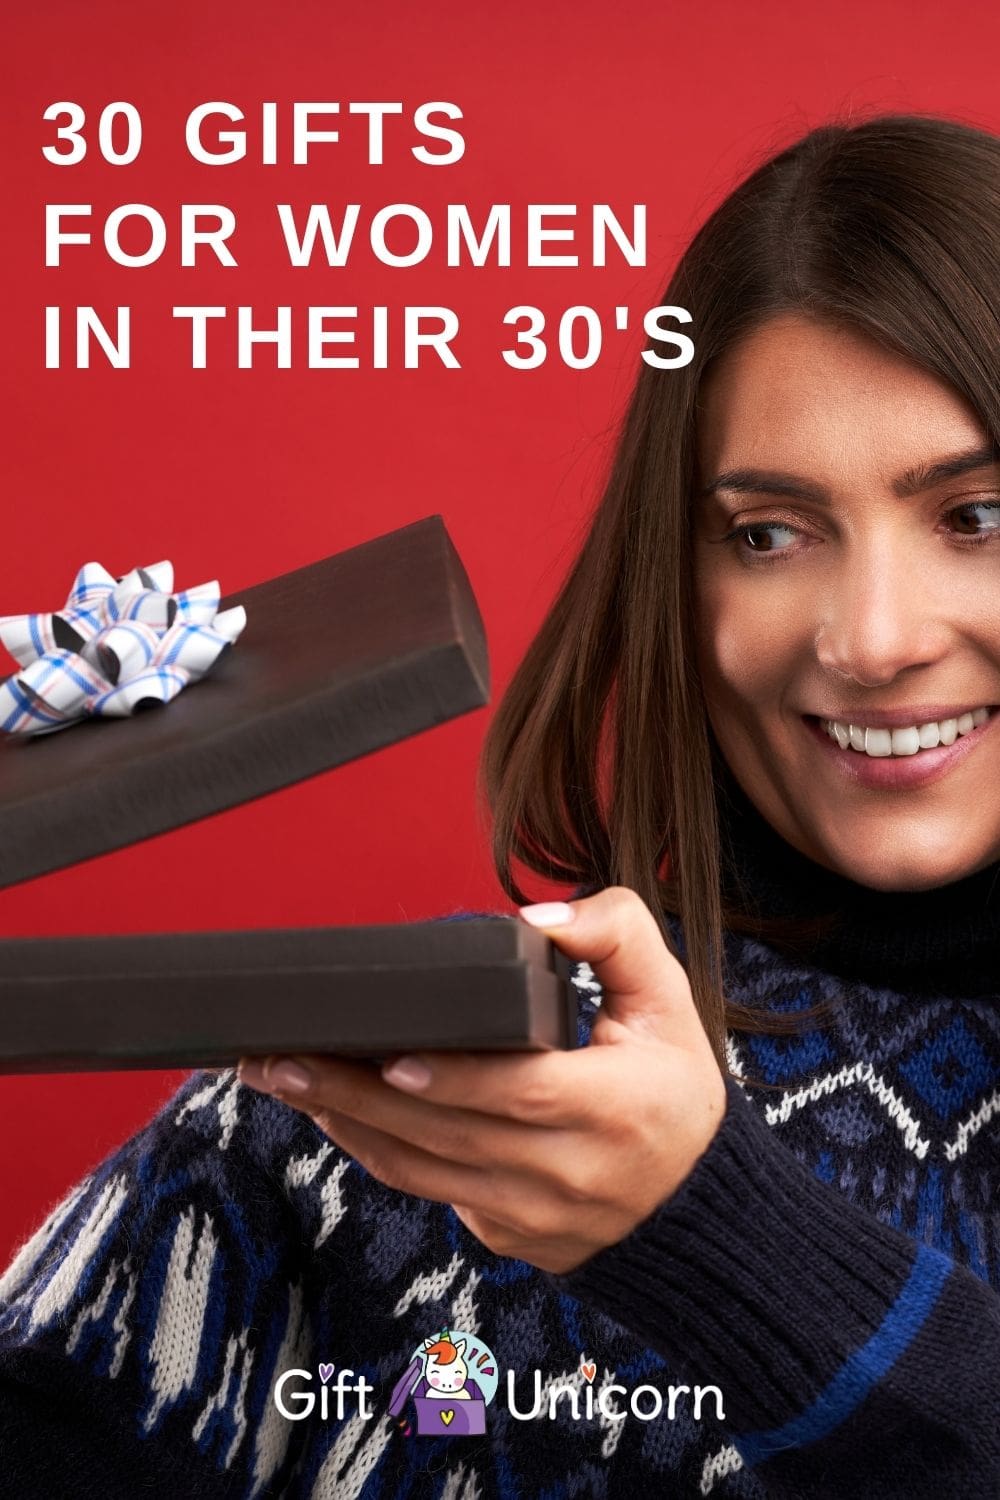 30 gifts for women in their 30's pin